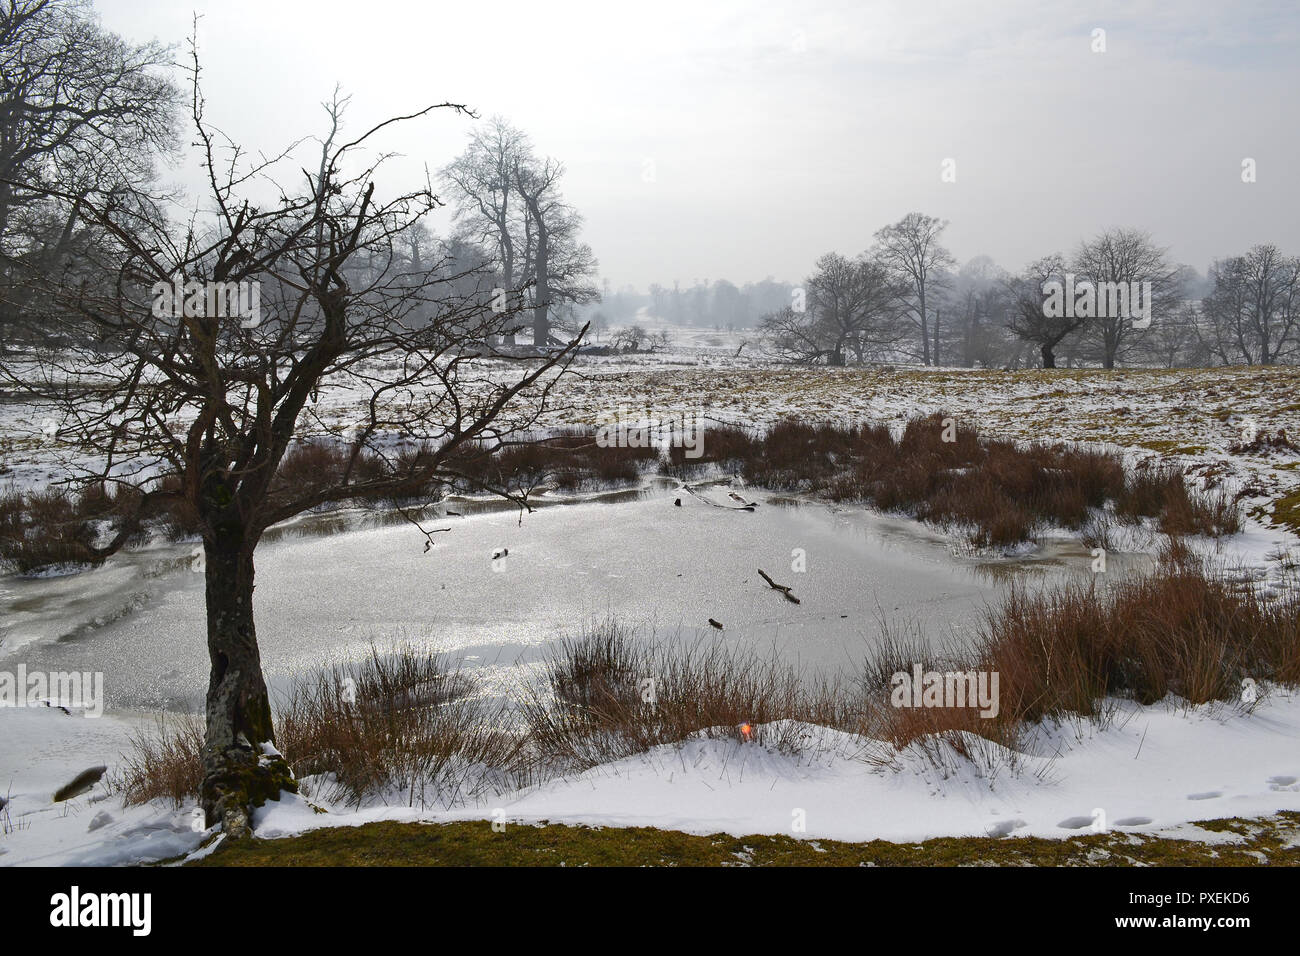 National Trust's Knole Park, Sevenoaks, Kent, England, UK on a snowy, misty day in March 2018. Kent Downs Area of Outstanding Natural Beauty. Stock Photo